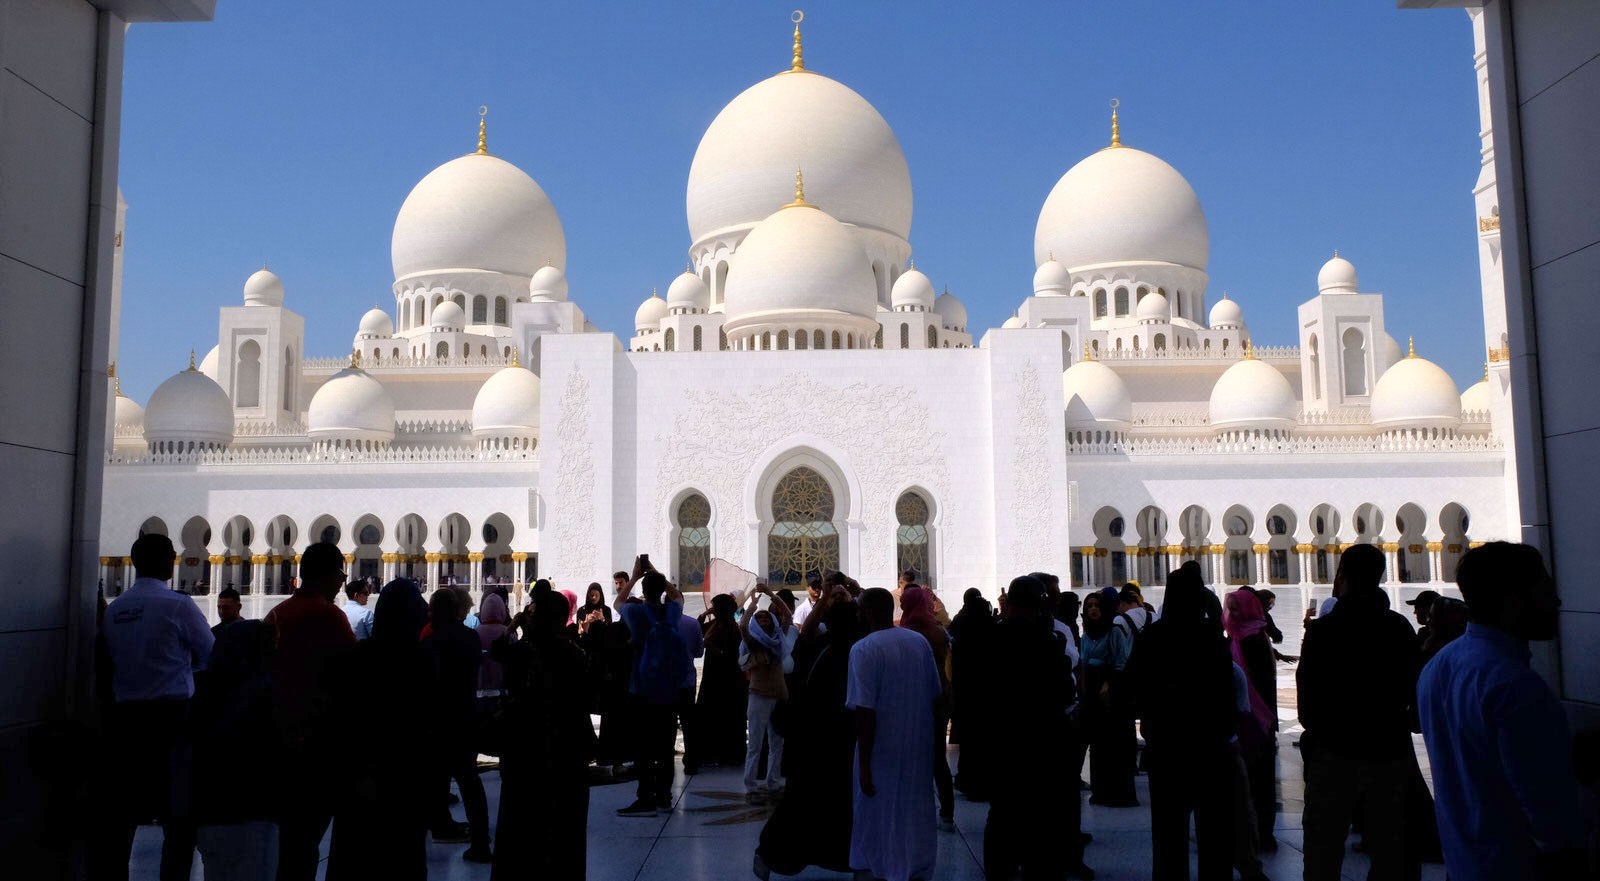 Image from Street Photography - The Sheikh Zayed Grand Mosque - Abu Dhabi